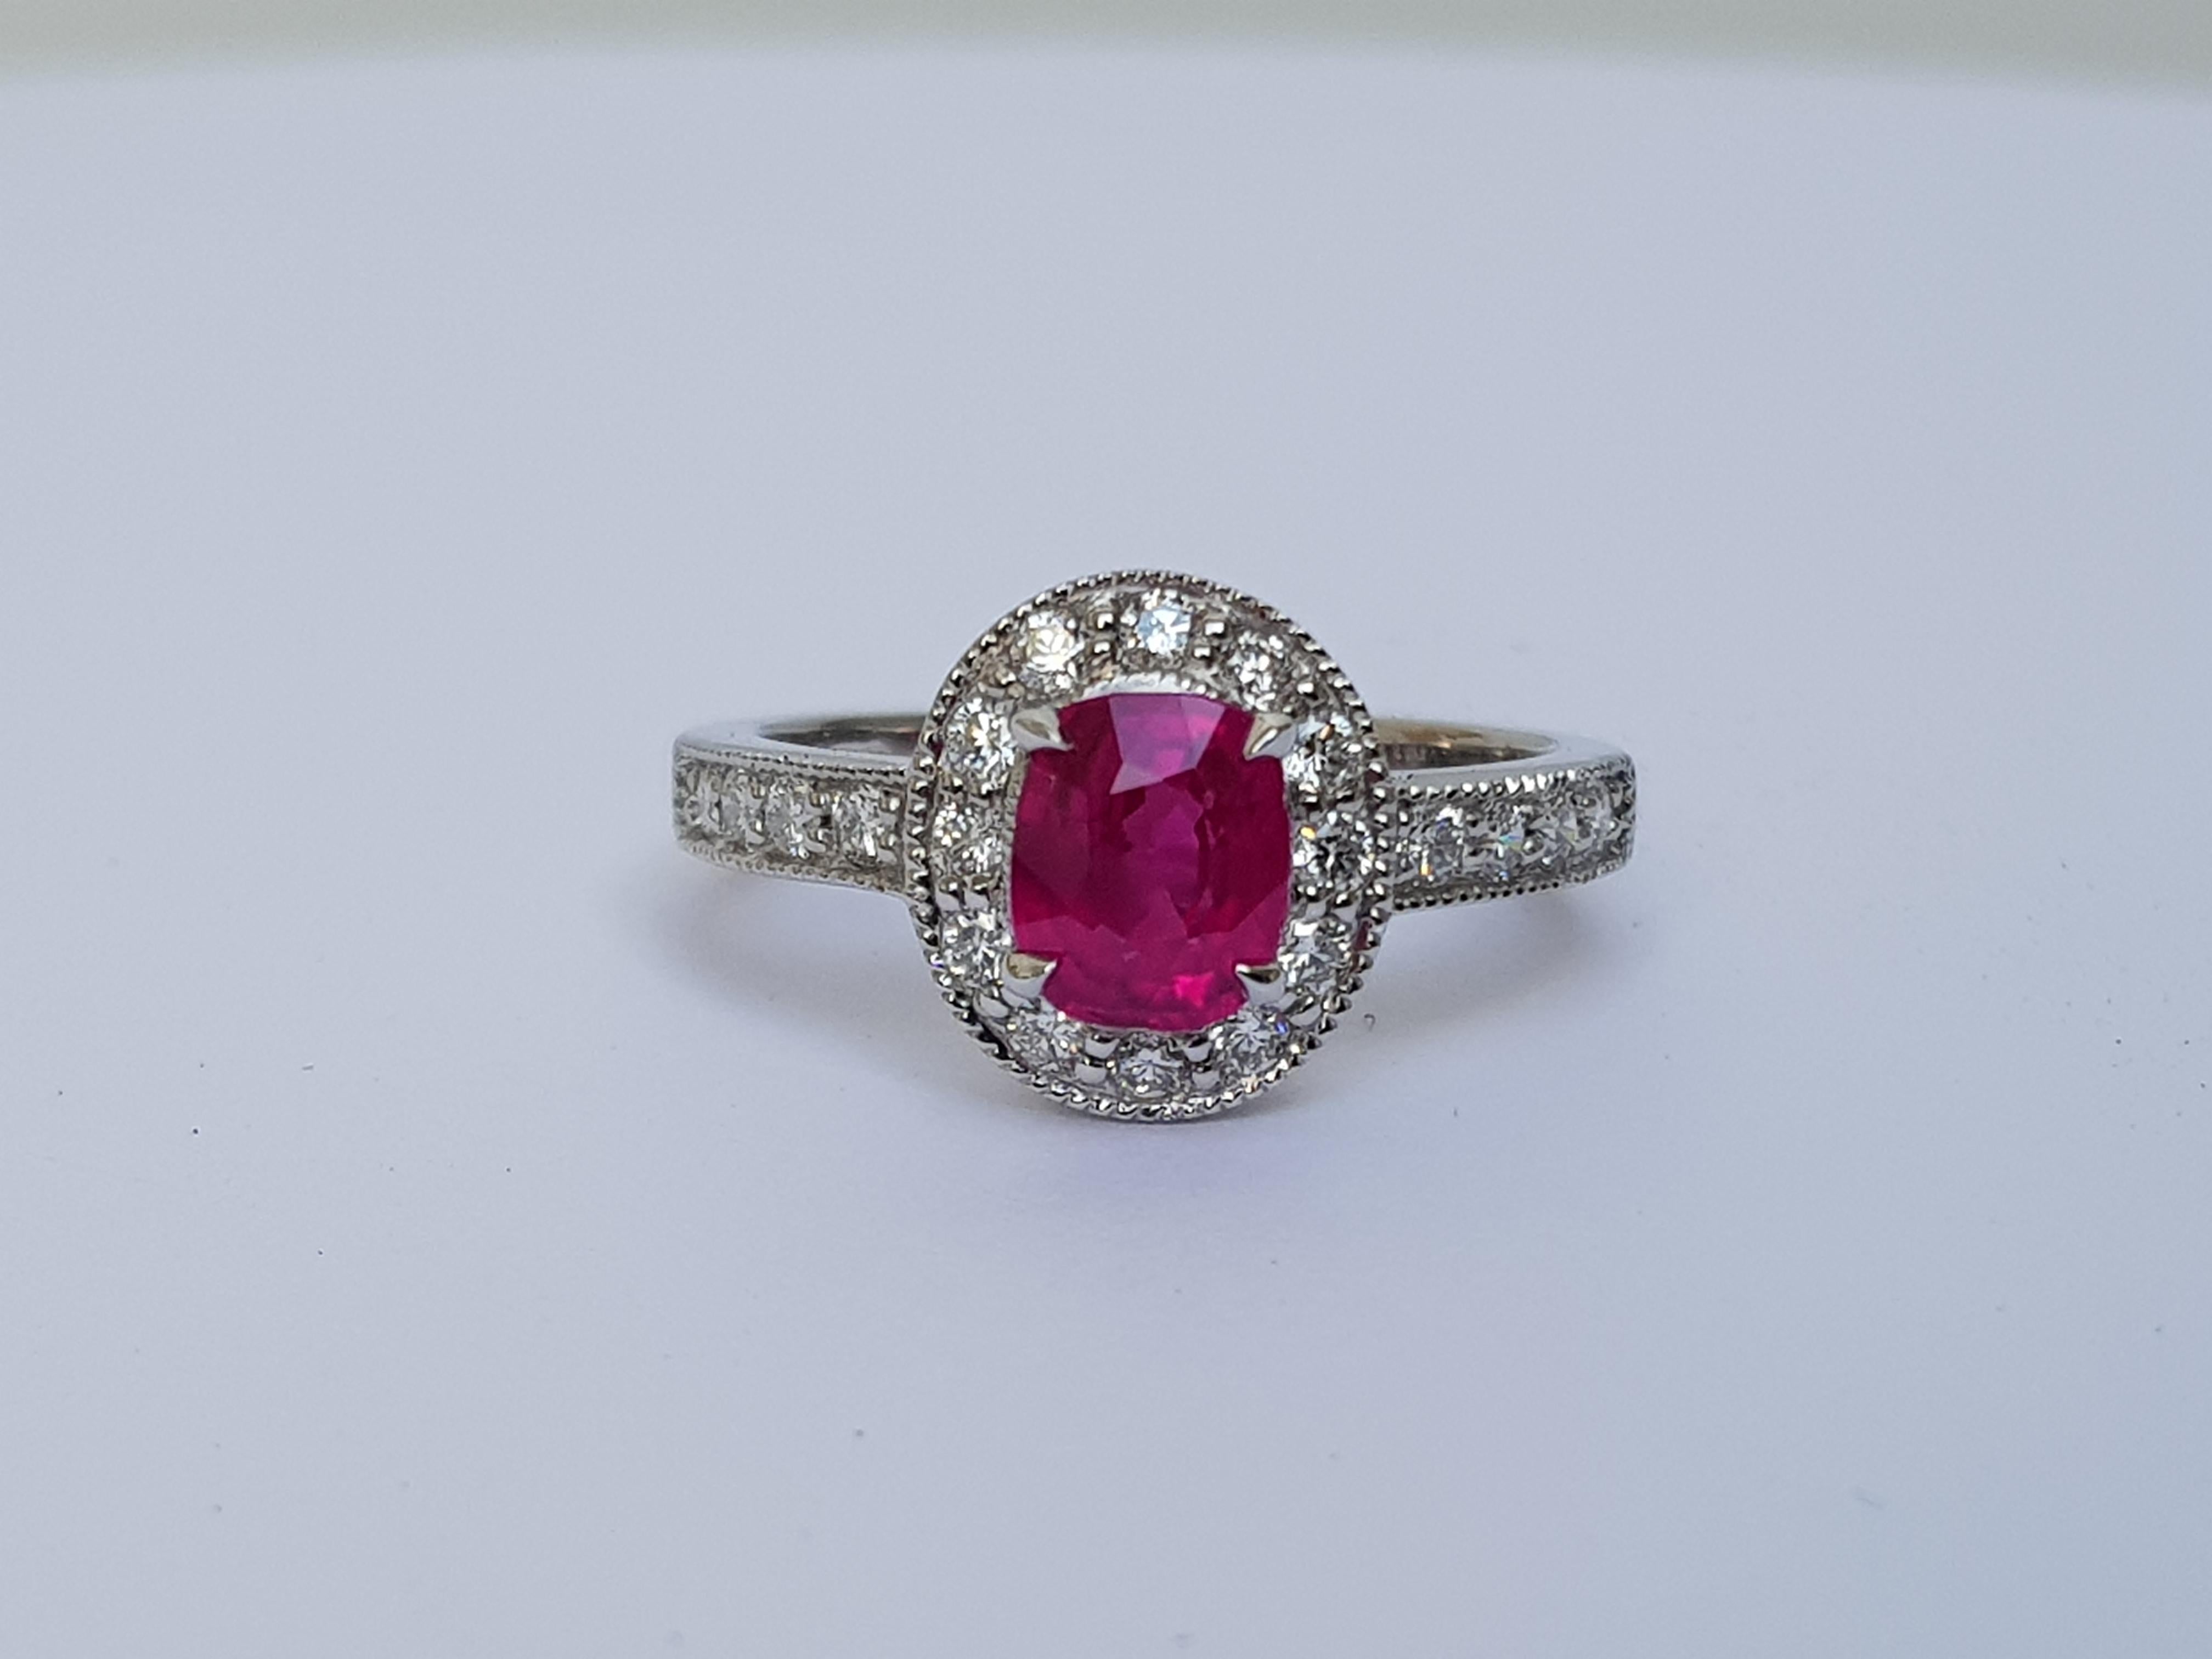 This beautiful art deco style ruby and diamond ring is comprised of an 18K White Gold band, 0.50 carats of round, white diamonds, and a unique central Ruby. 

The Ruby, which weighs 1.08 carats is of Burmese (Myanmar) origin, and has no indications